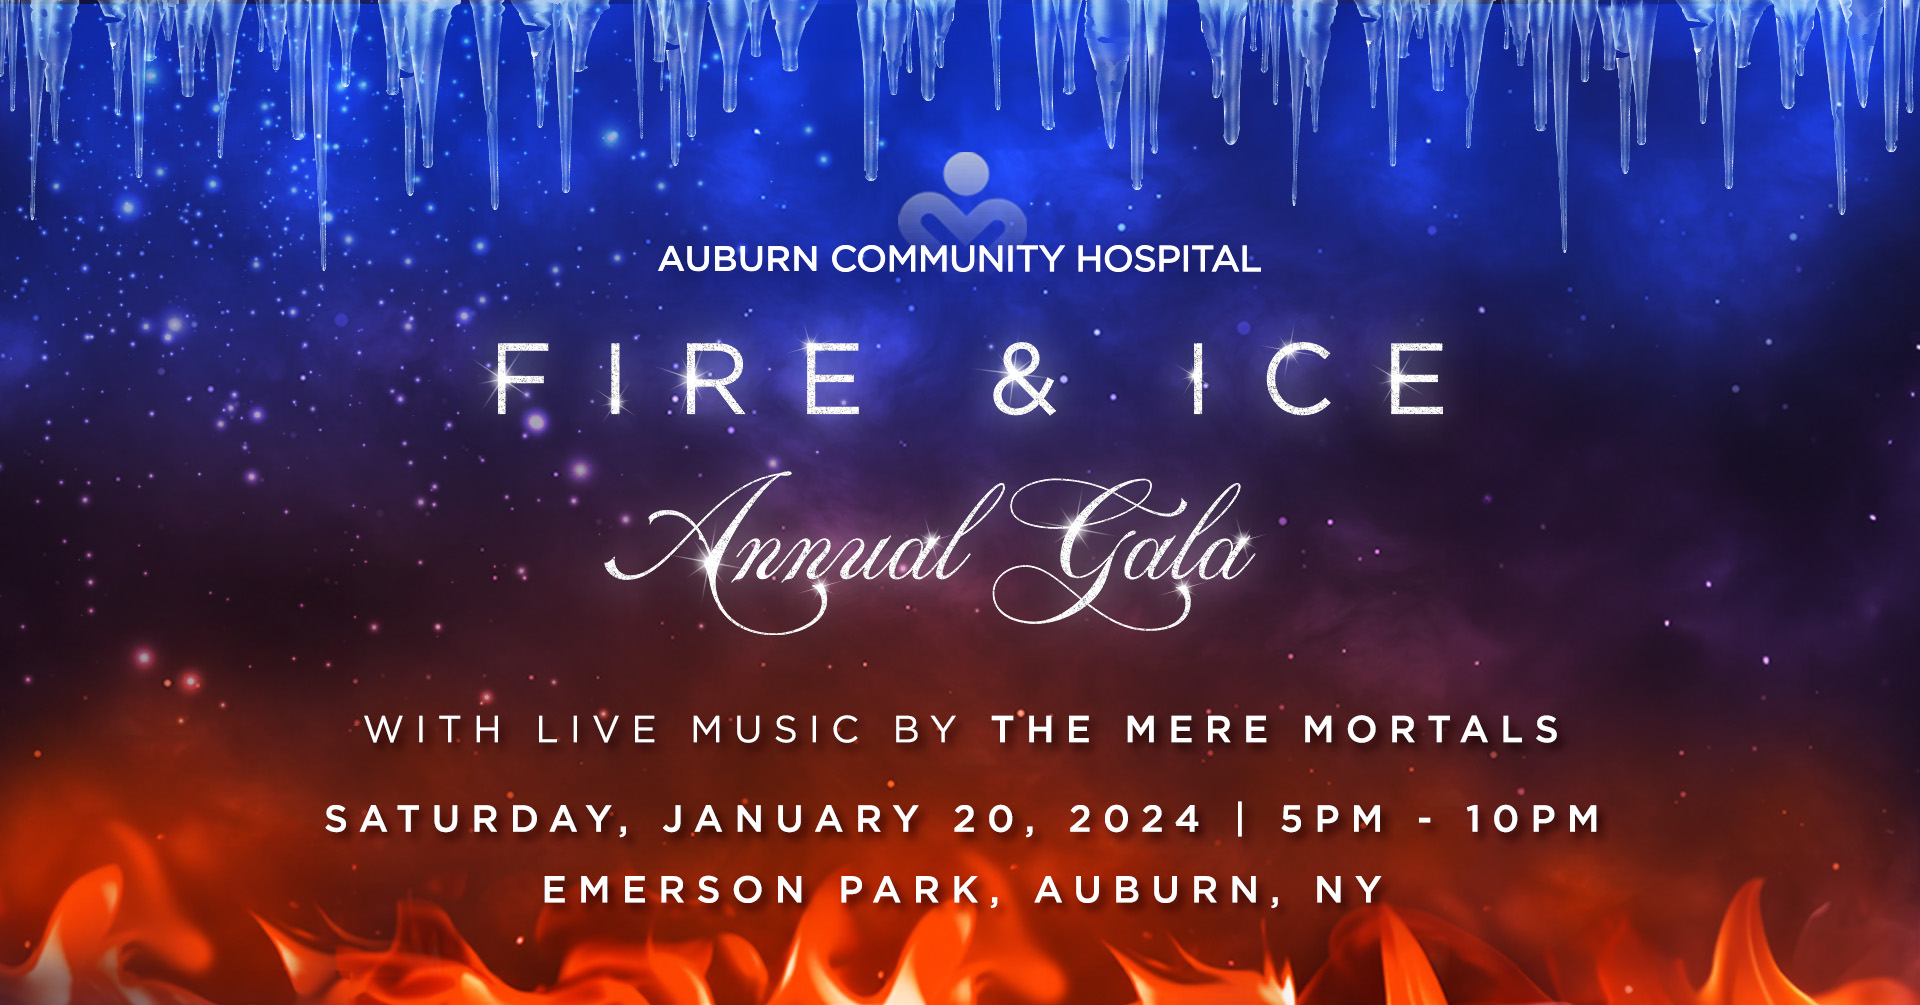 Tickets and Sponsorships Available for Auburn Community Hospital’s 2024 Gala